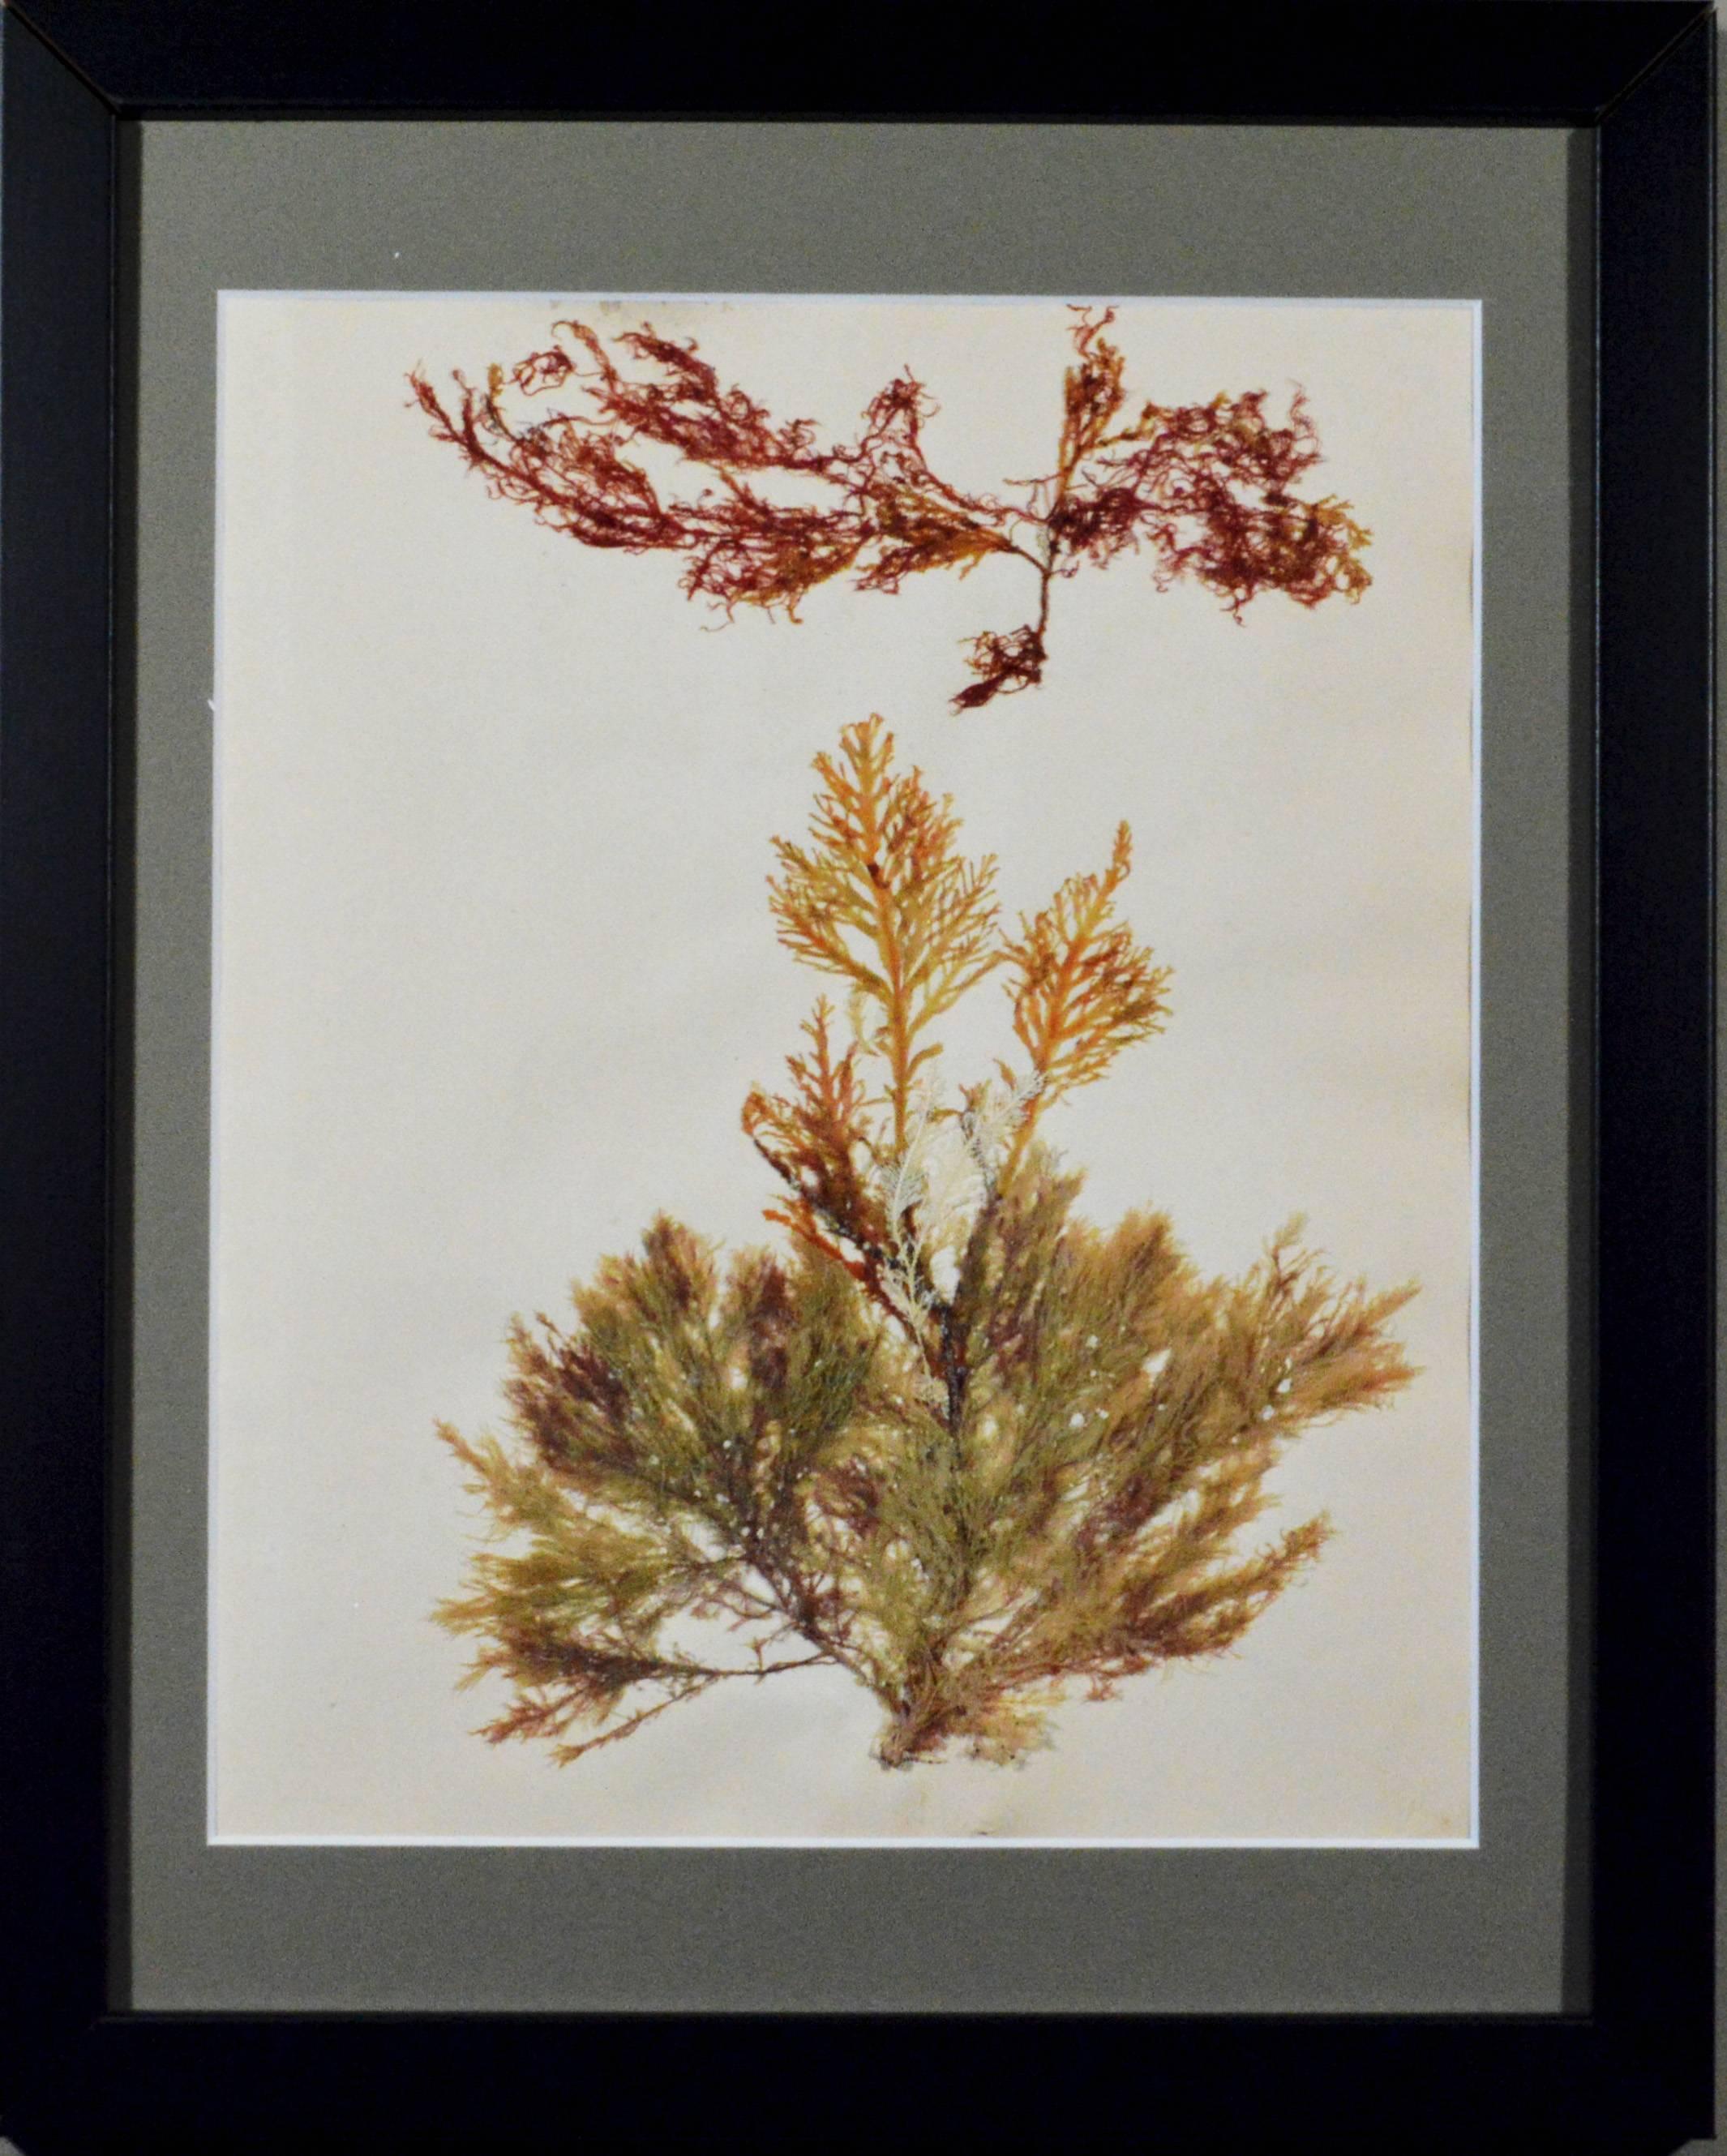 Victorian ladies pressed seaweed pictures, 
circa 1885

The 19 different pictures consist of groups of seaweed arranged on paper in an artistic manner and now framed in simple black frames. Biologists pressed samples of seaweeds for herbariums